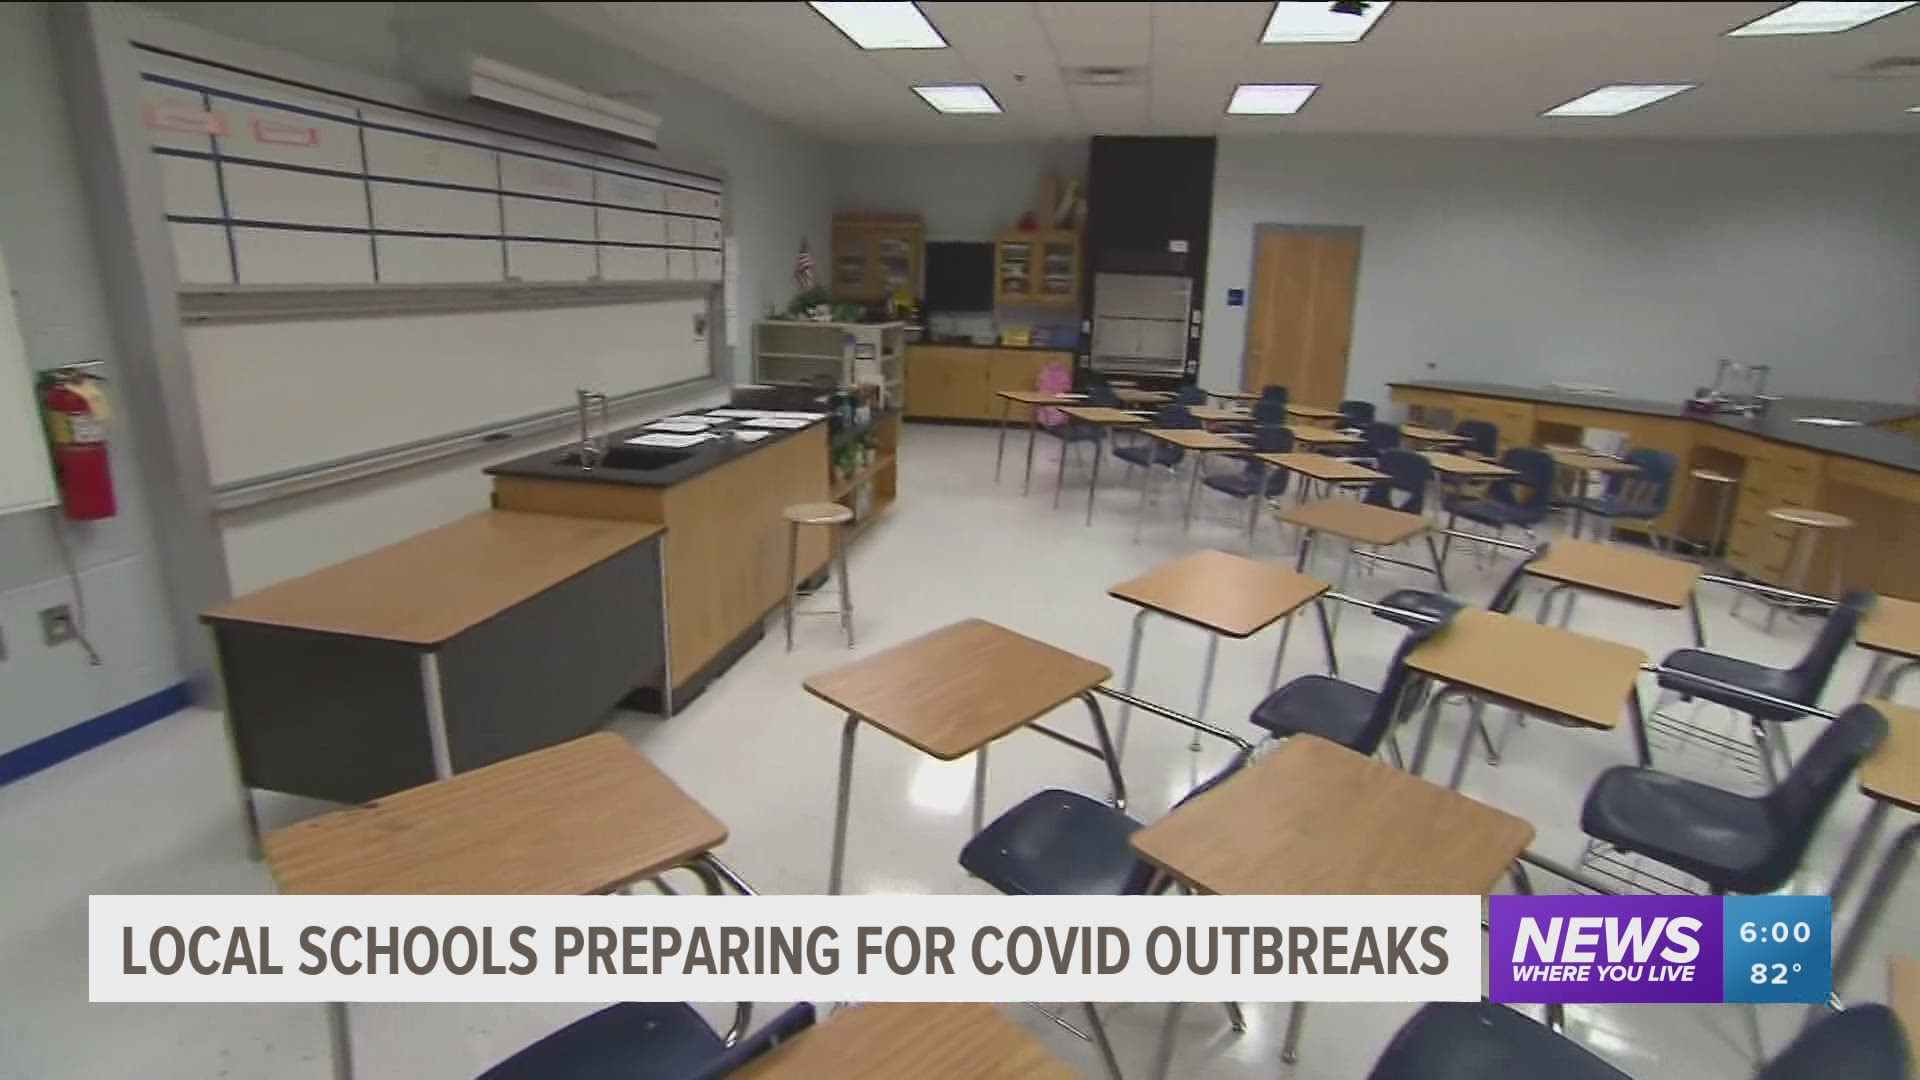 The Arkansas Department of Health says it has not finalized its guidance for schools to safely return in the fall as COVID-19 cases rise in the state.